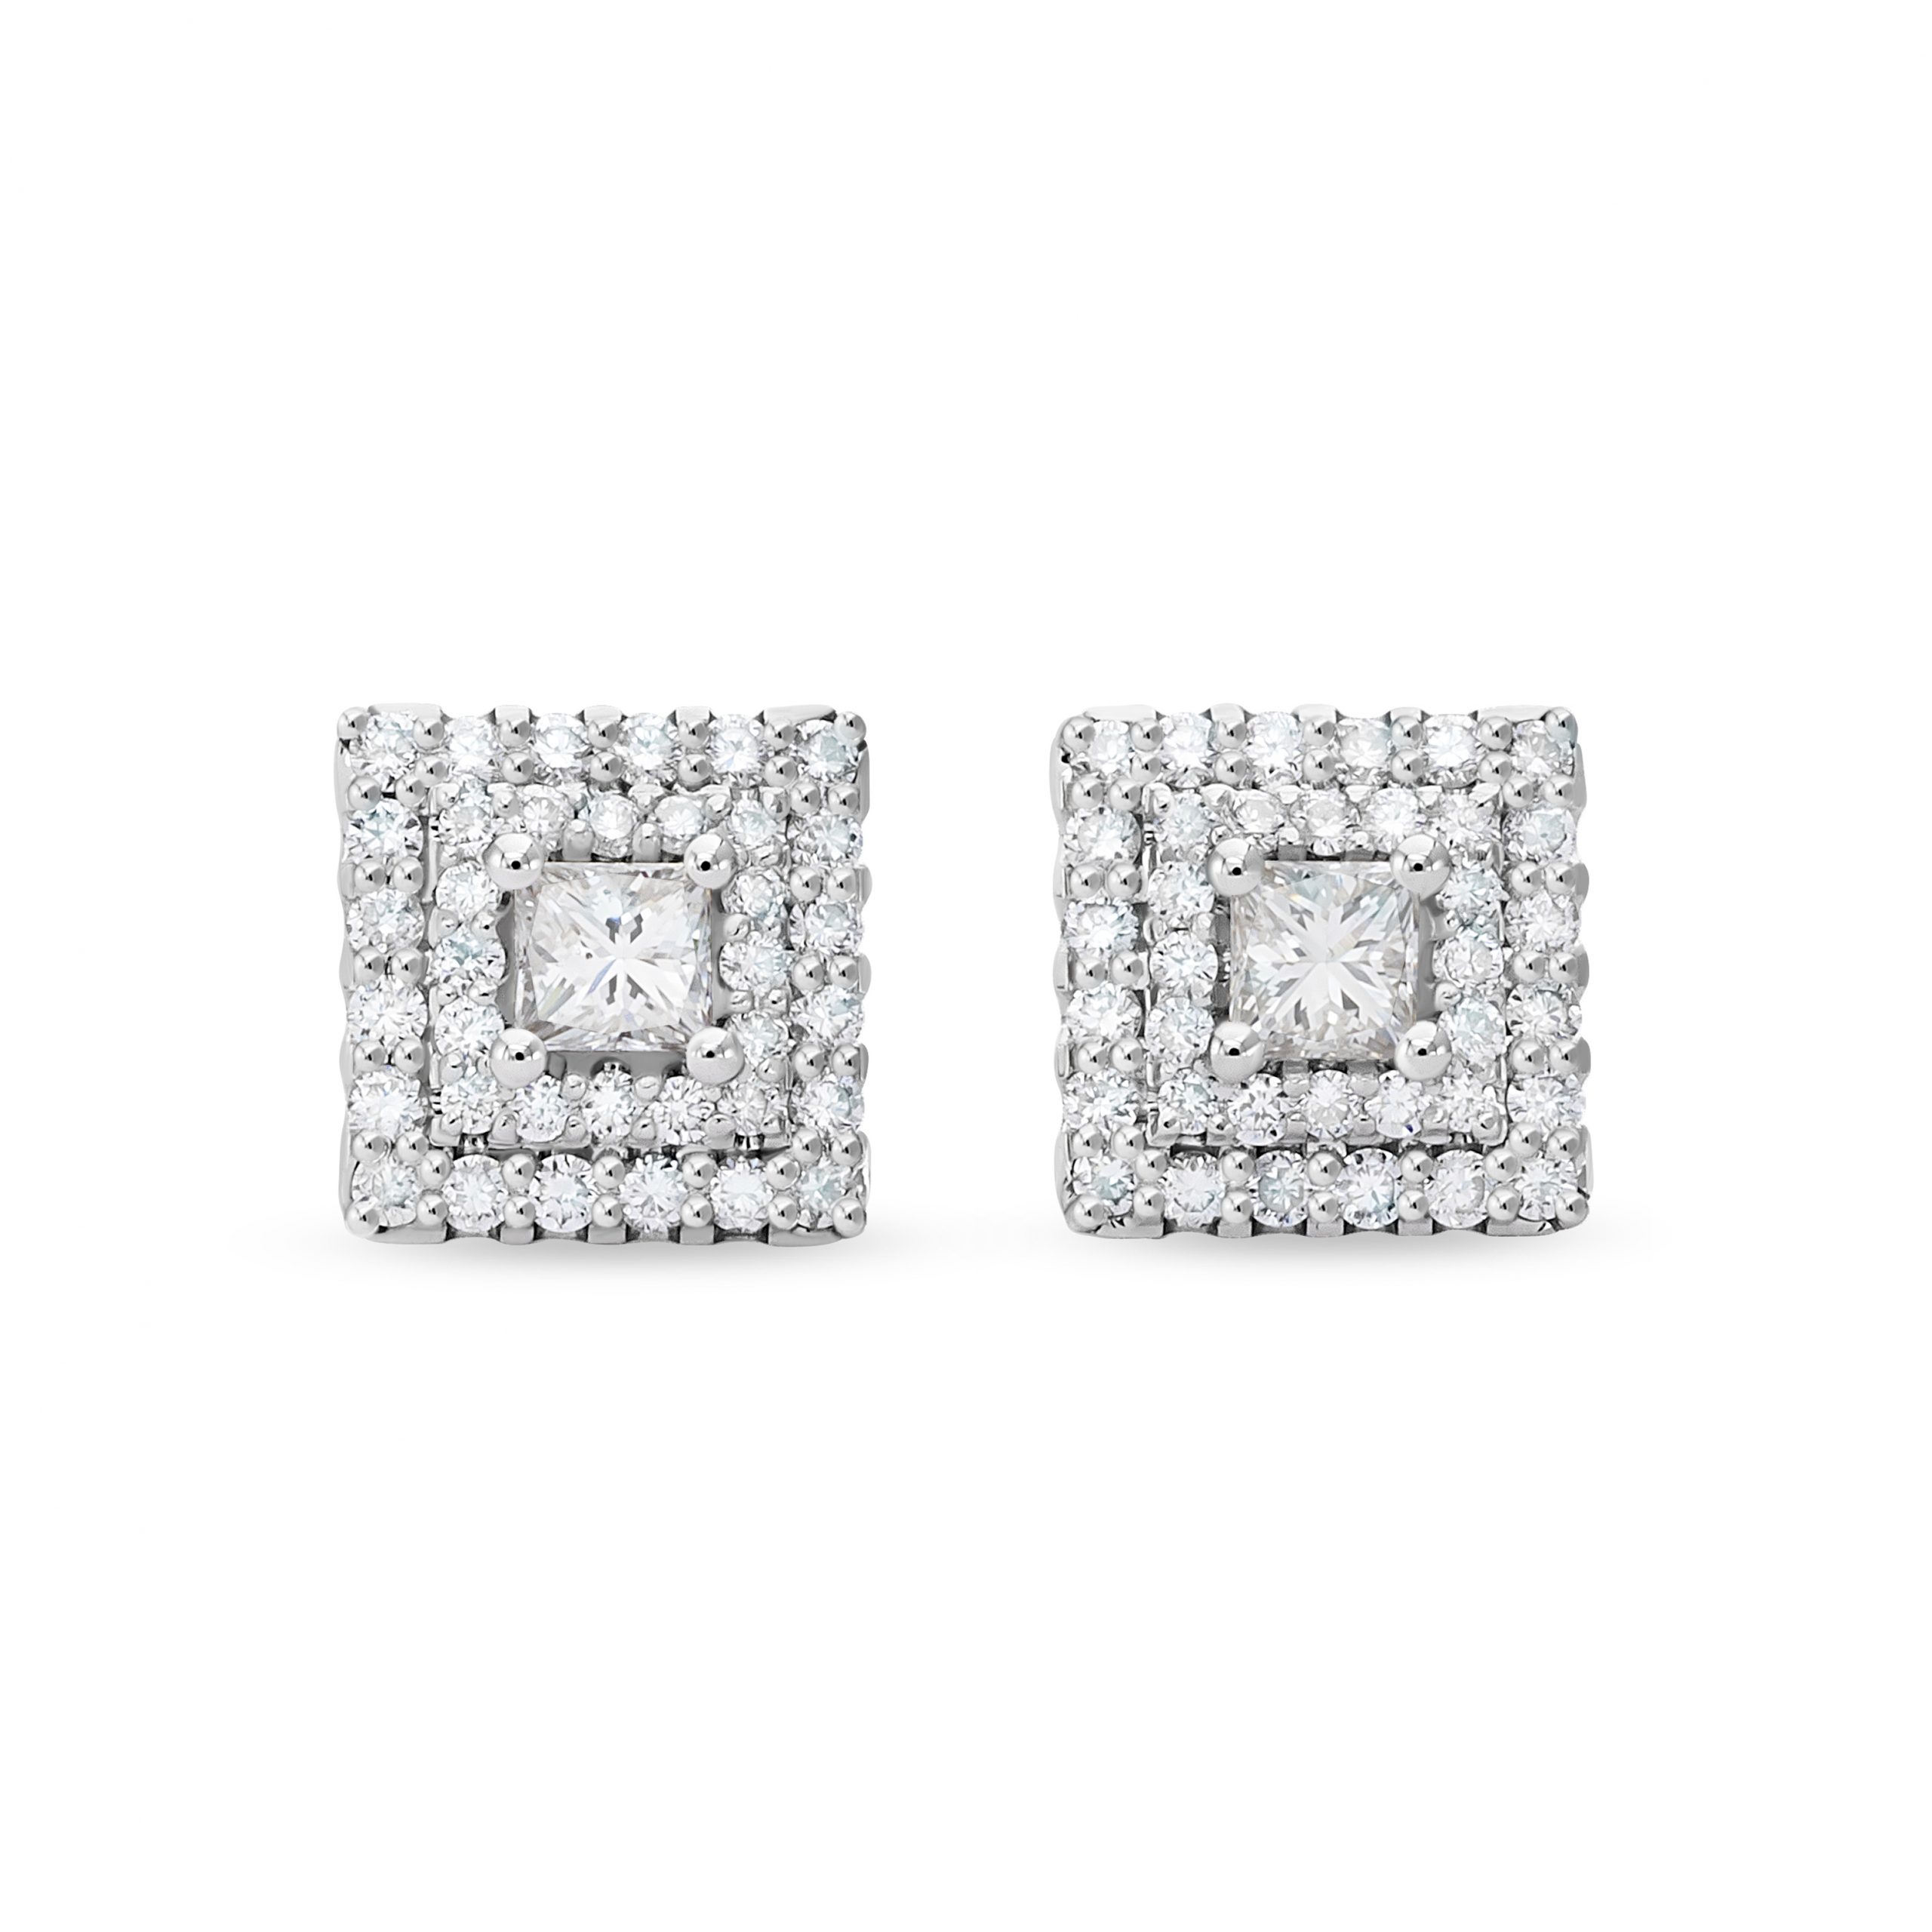 Diamond stud earrings with a total weight of 1.78 ct #1